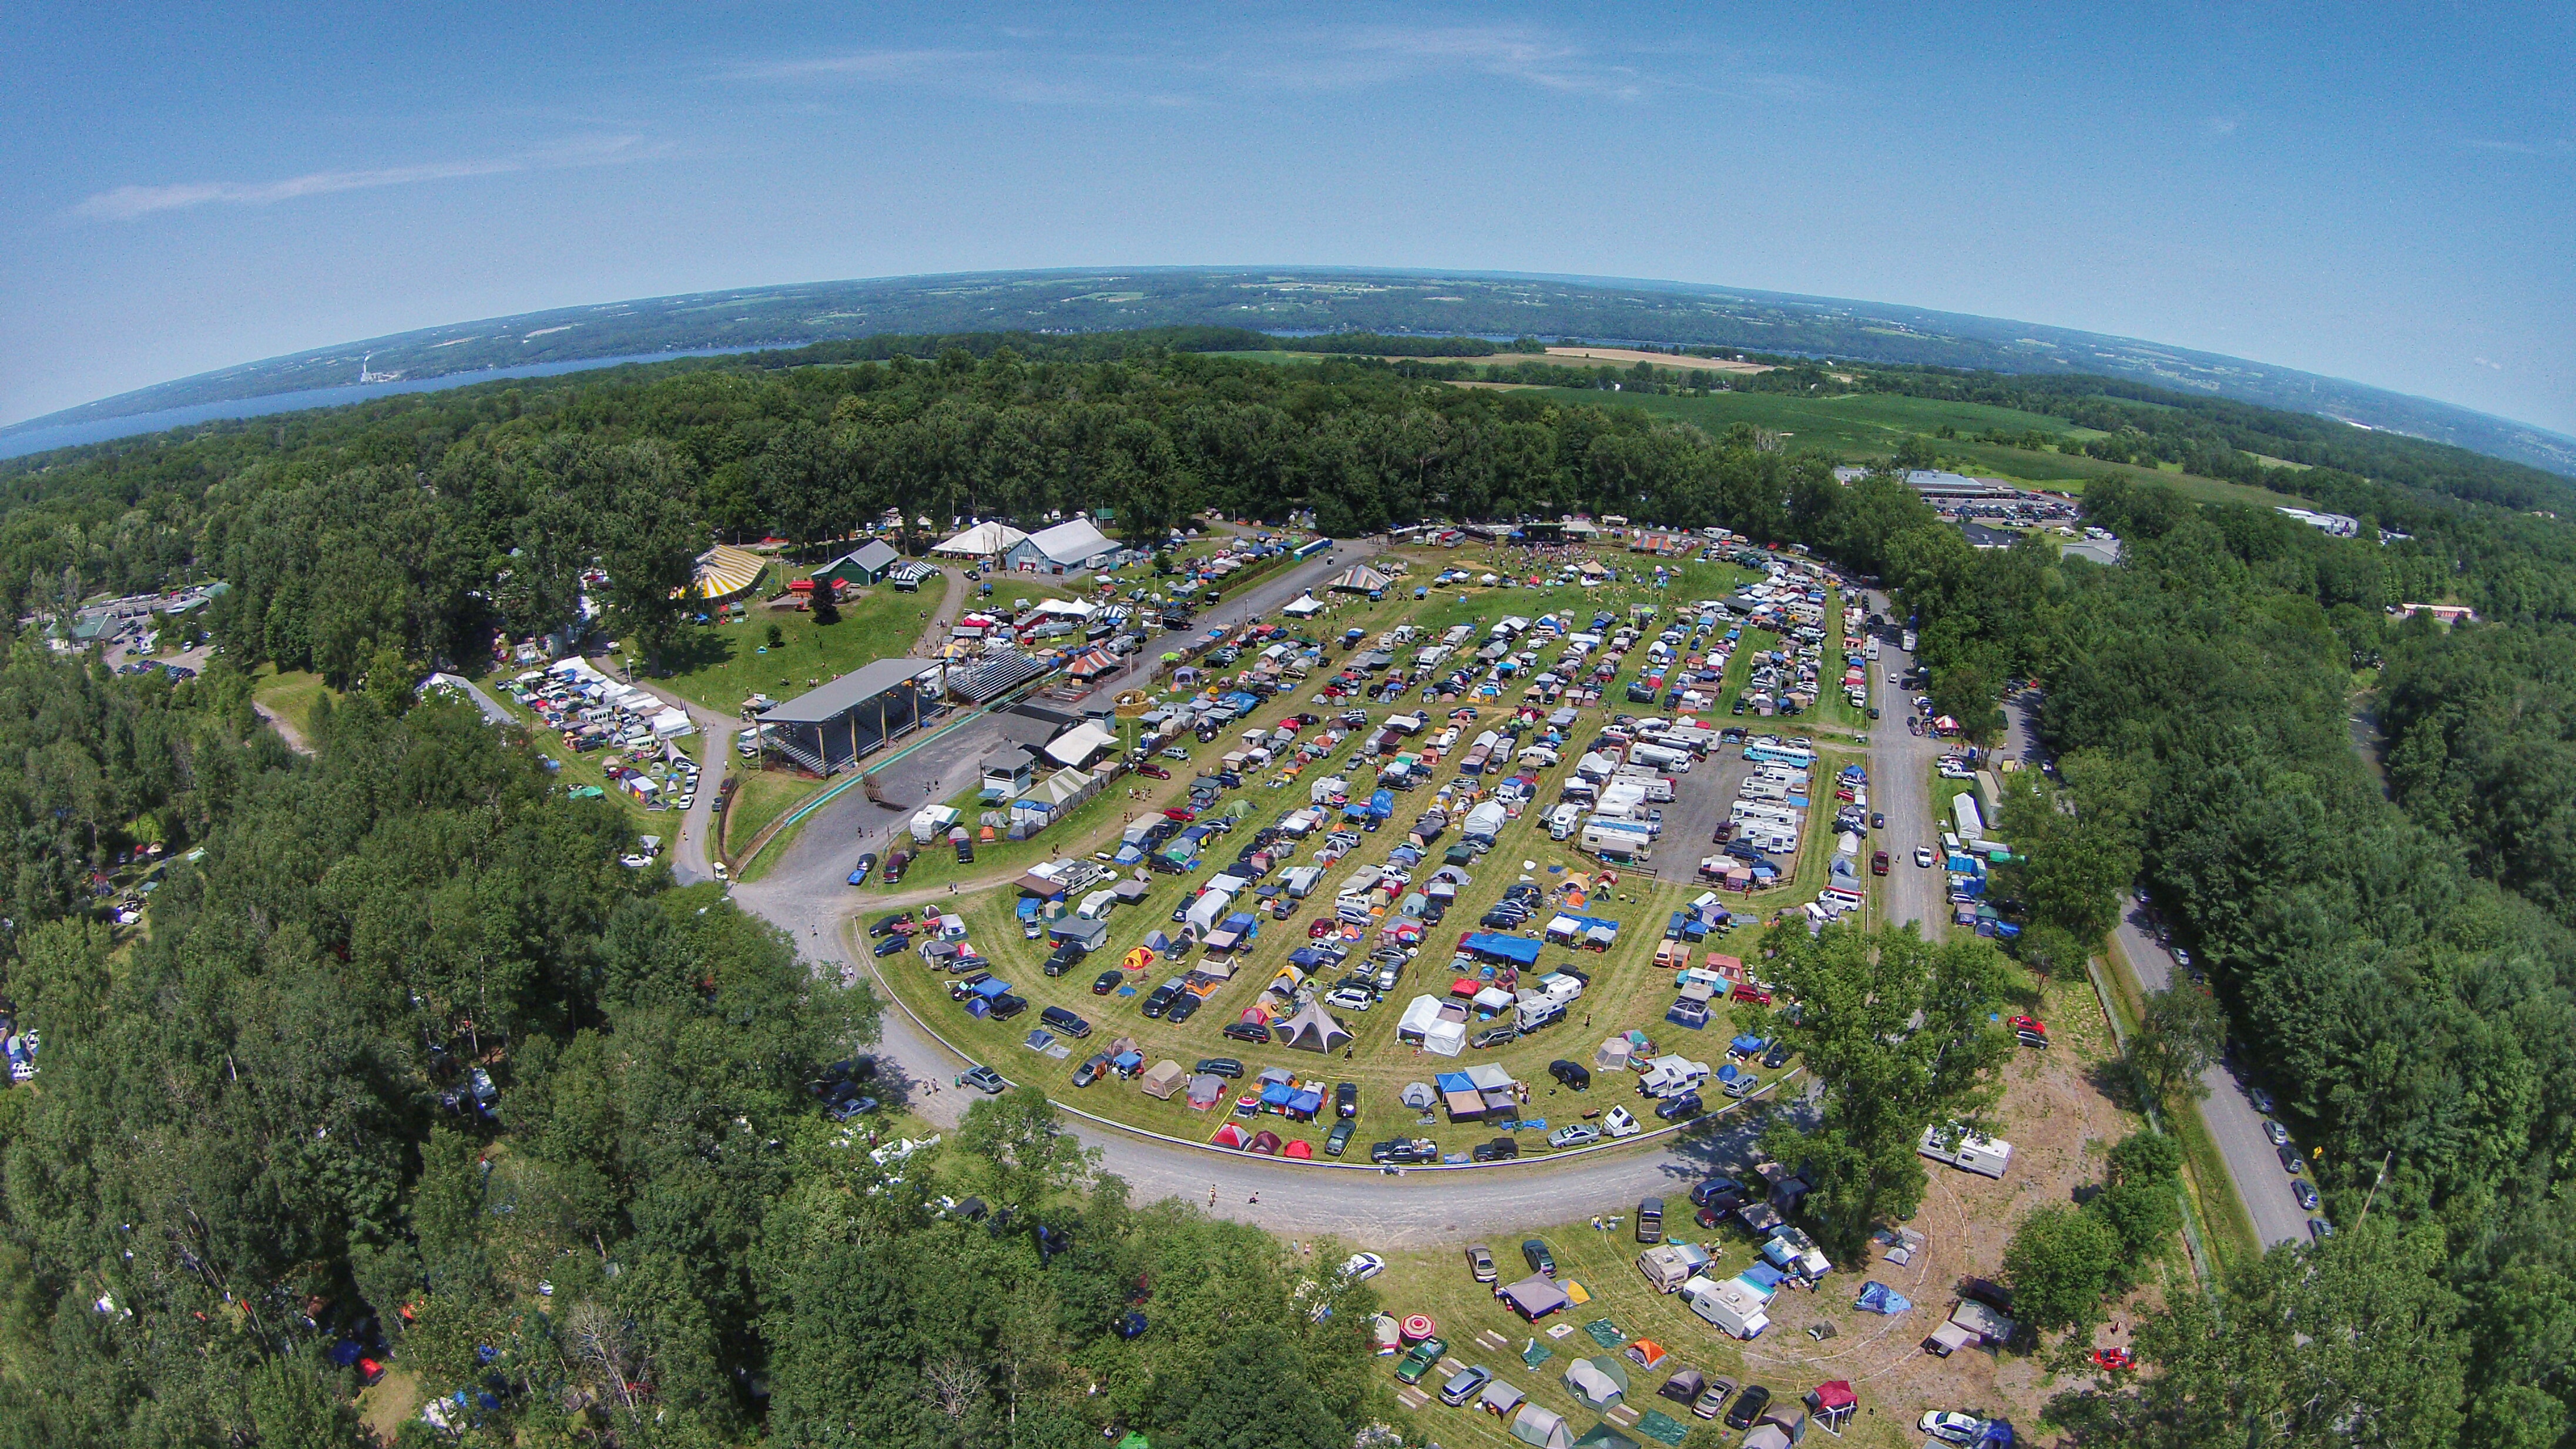 2019 Finger Lakes GrassRoots Festival of Music & Dance Releases Full Schedule